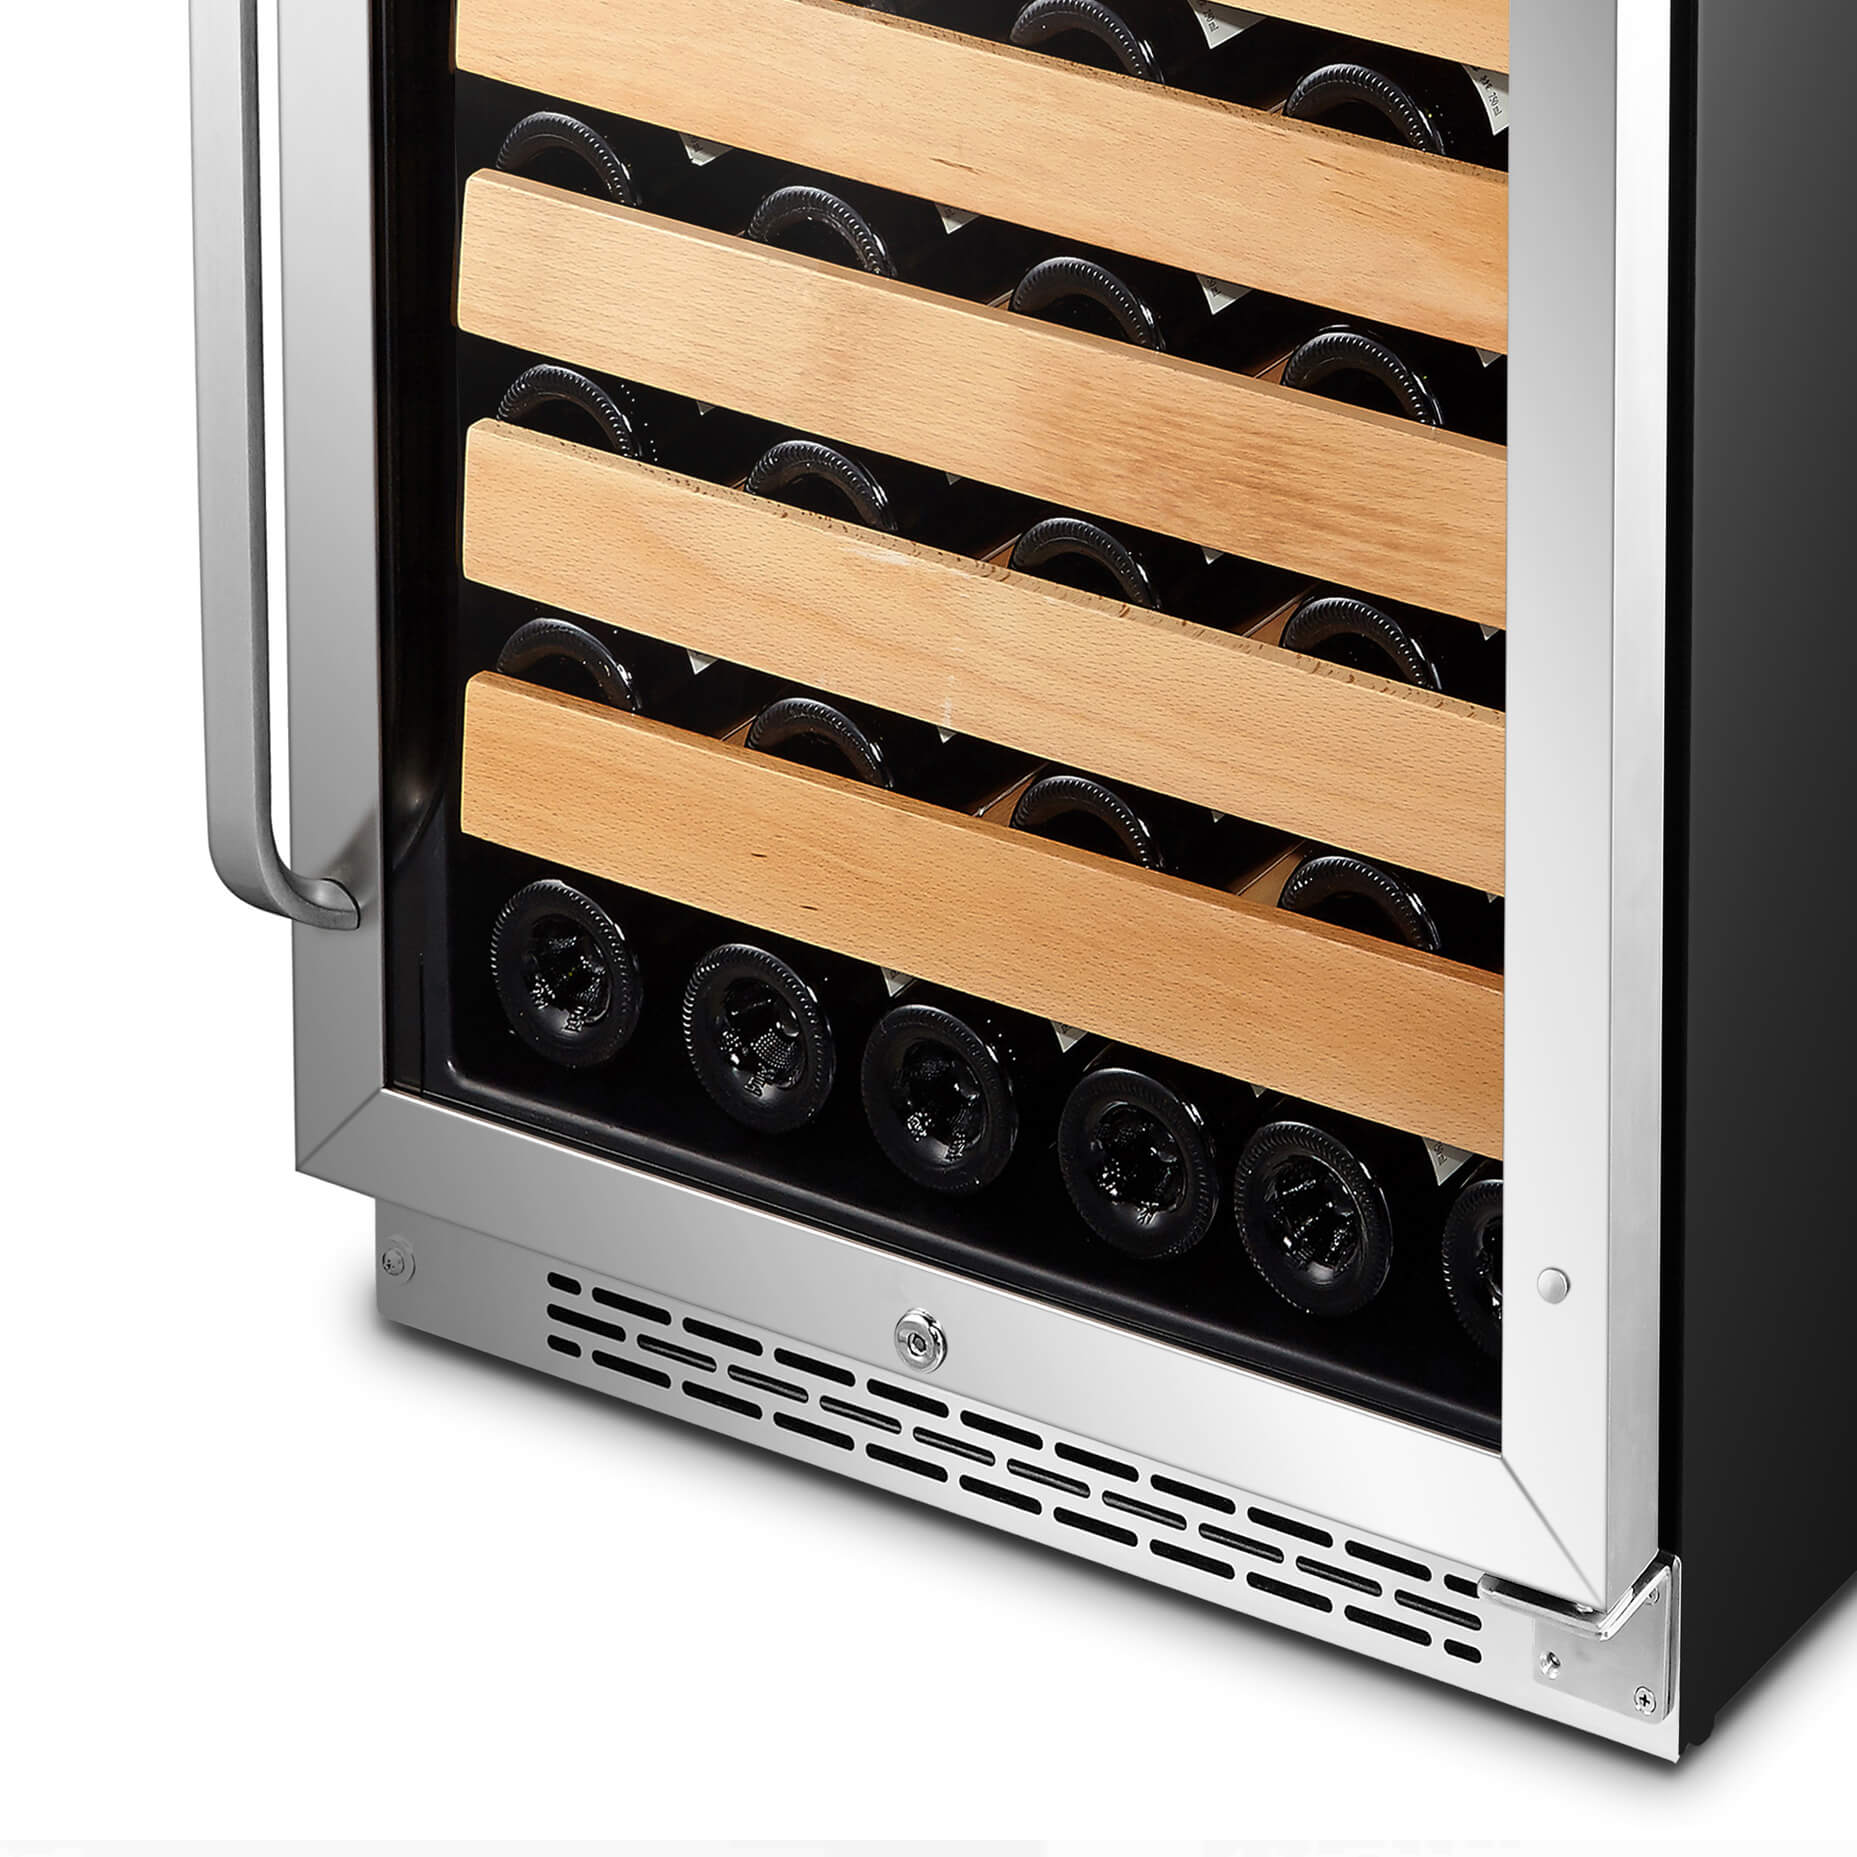 Whynter - 24" 54-Bottle Single-Zone Stainless Steel Wine Cooler (BWR-541STS)